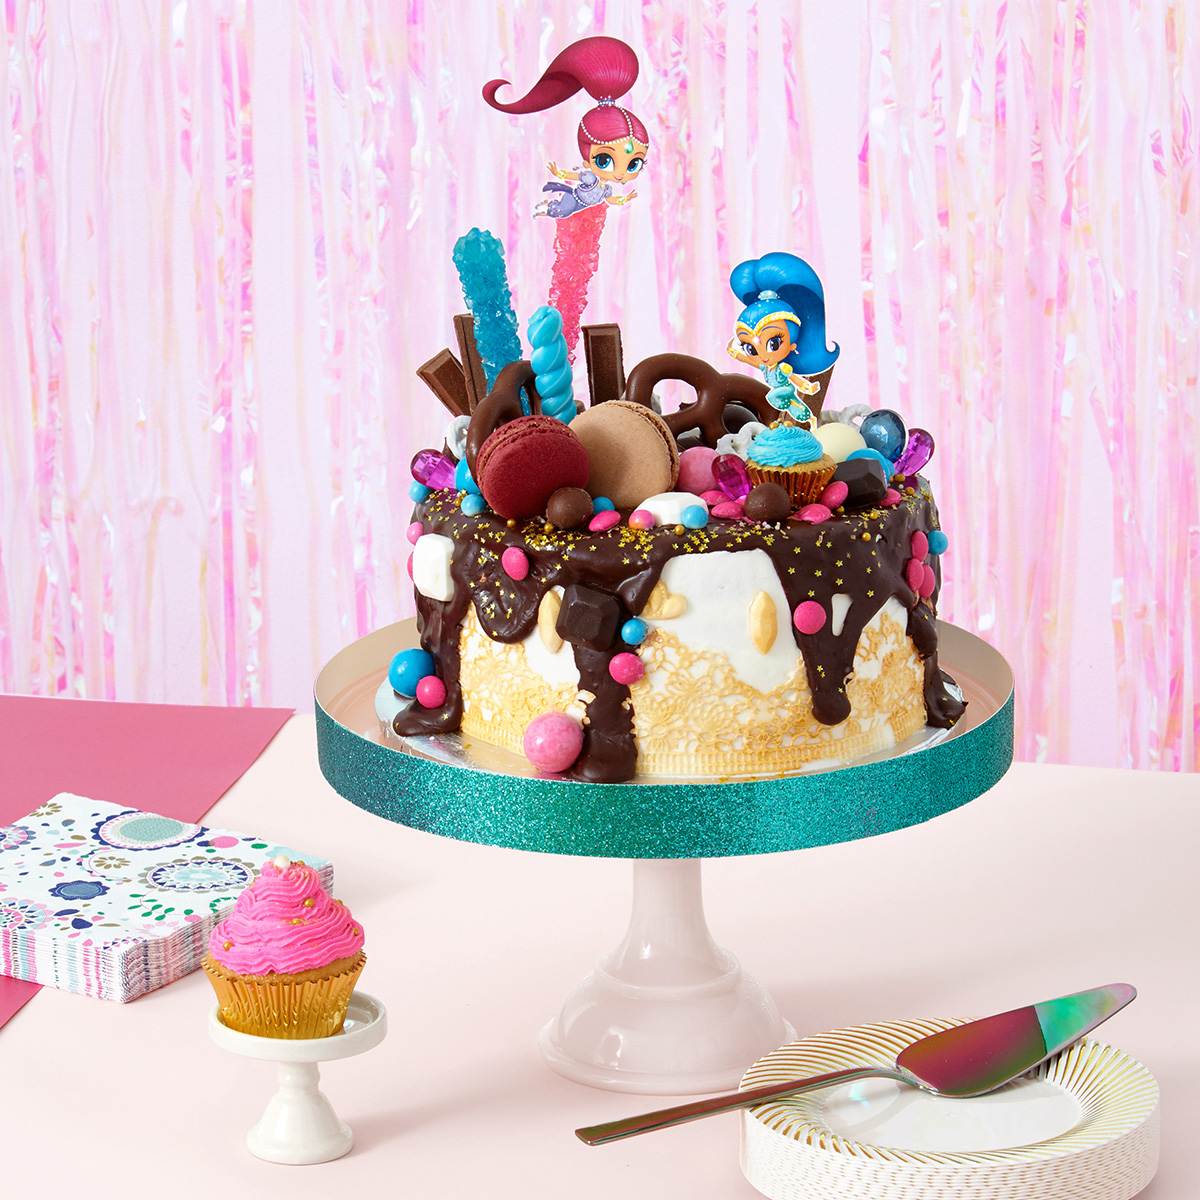 Shimmer and Shine "Oopsie!" Birthday Cake